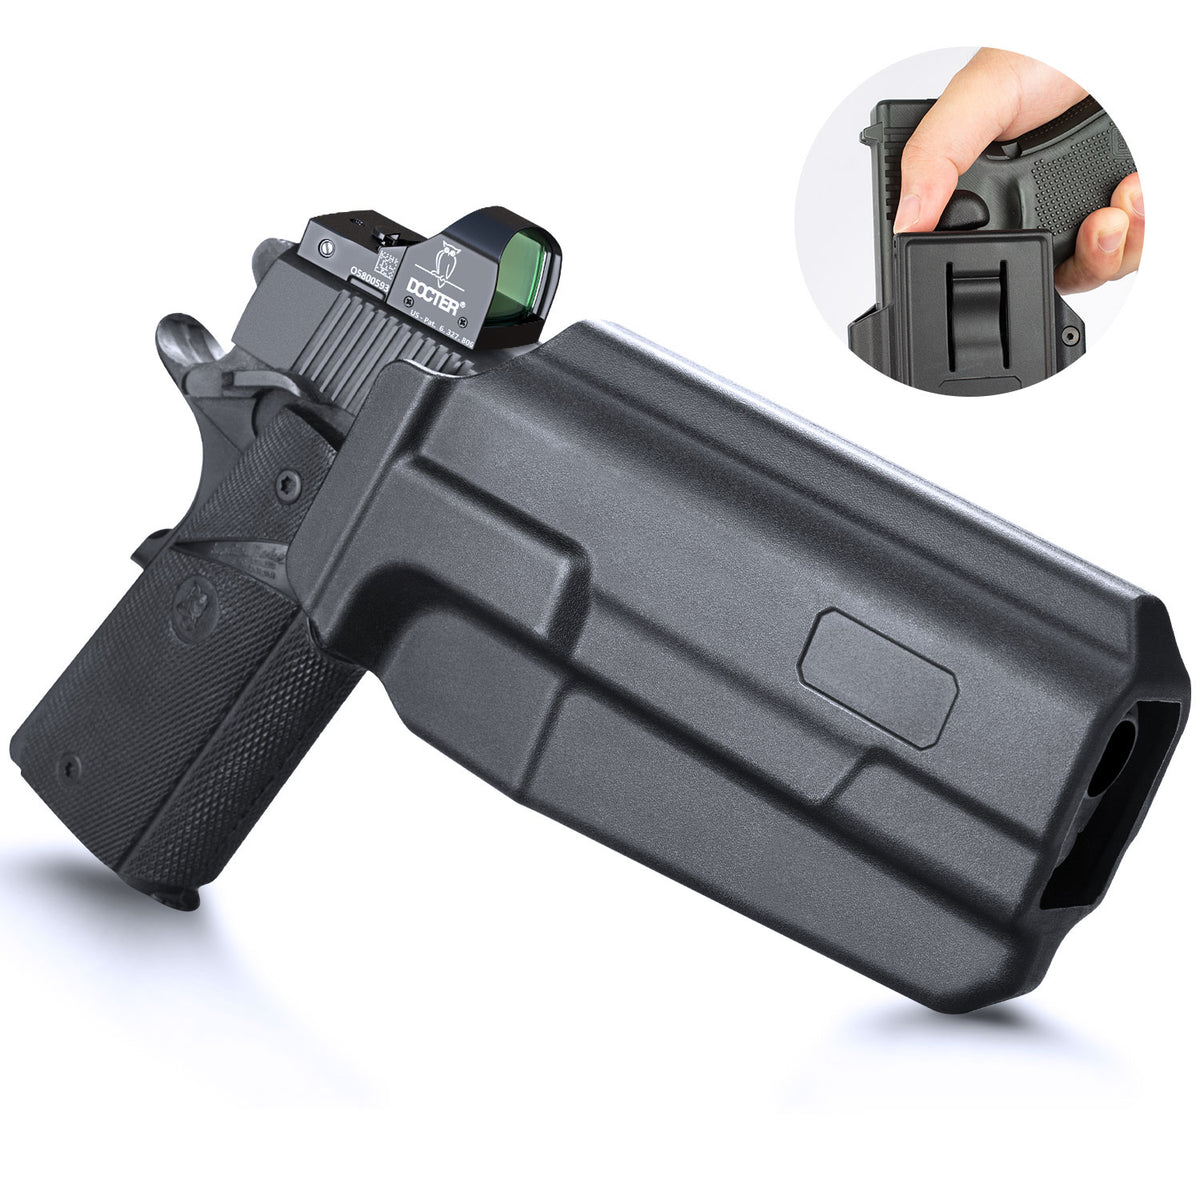 Polymer Level II Retention Thumb Release OWB Holster with Optic Cut  for 1911  .45 ACP Pistol No Rail